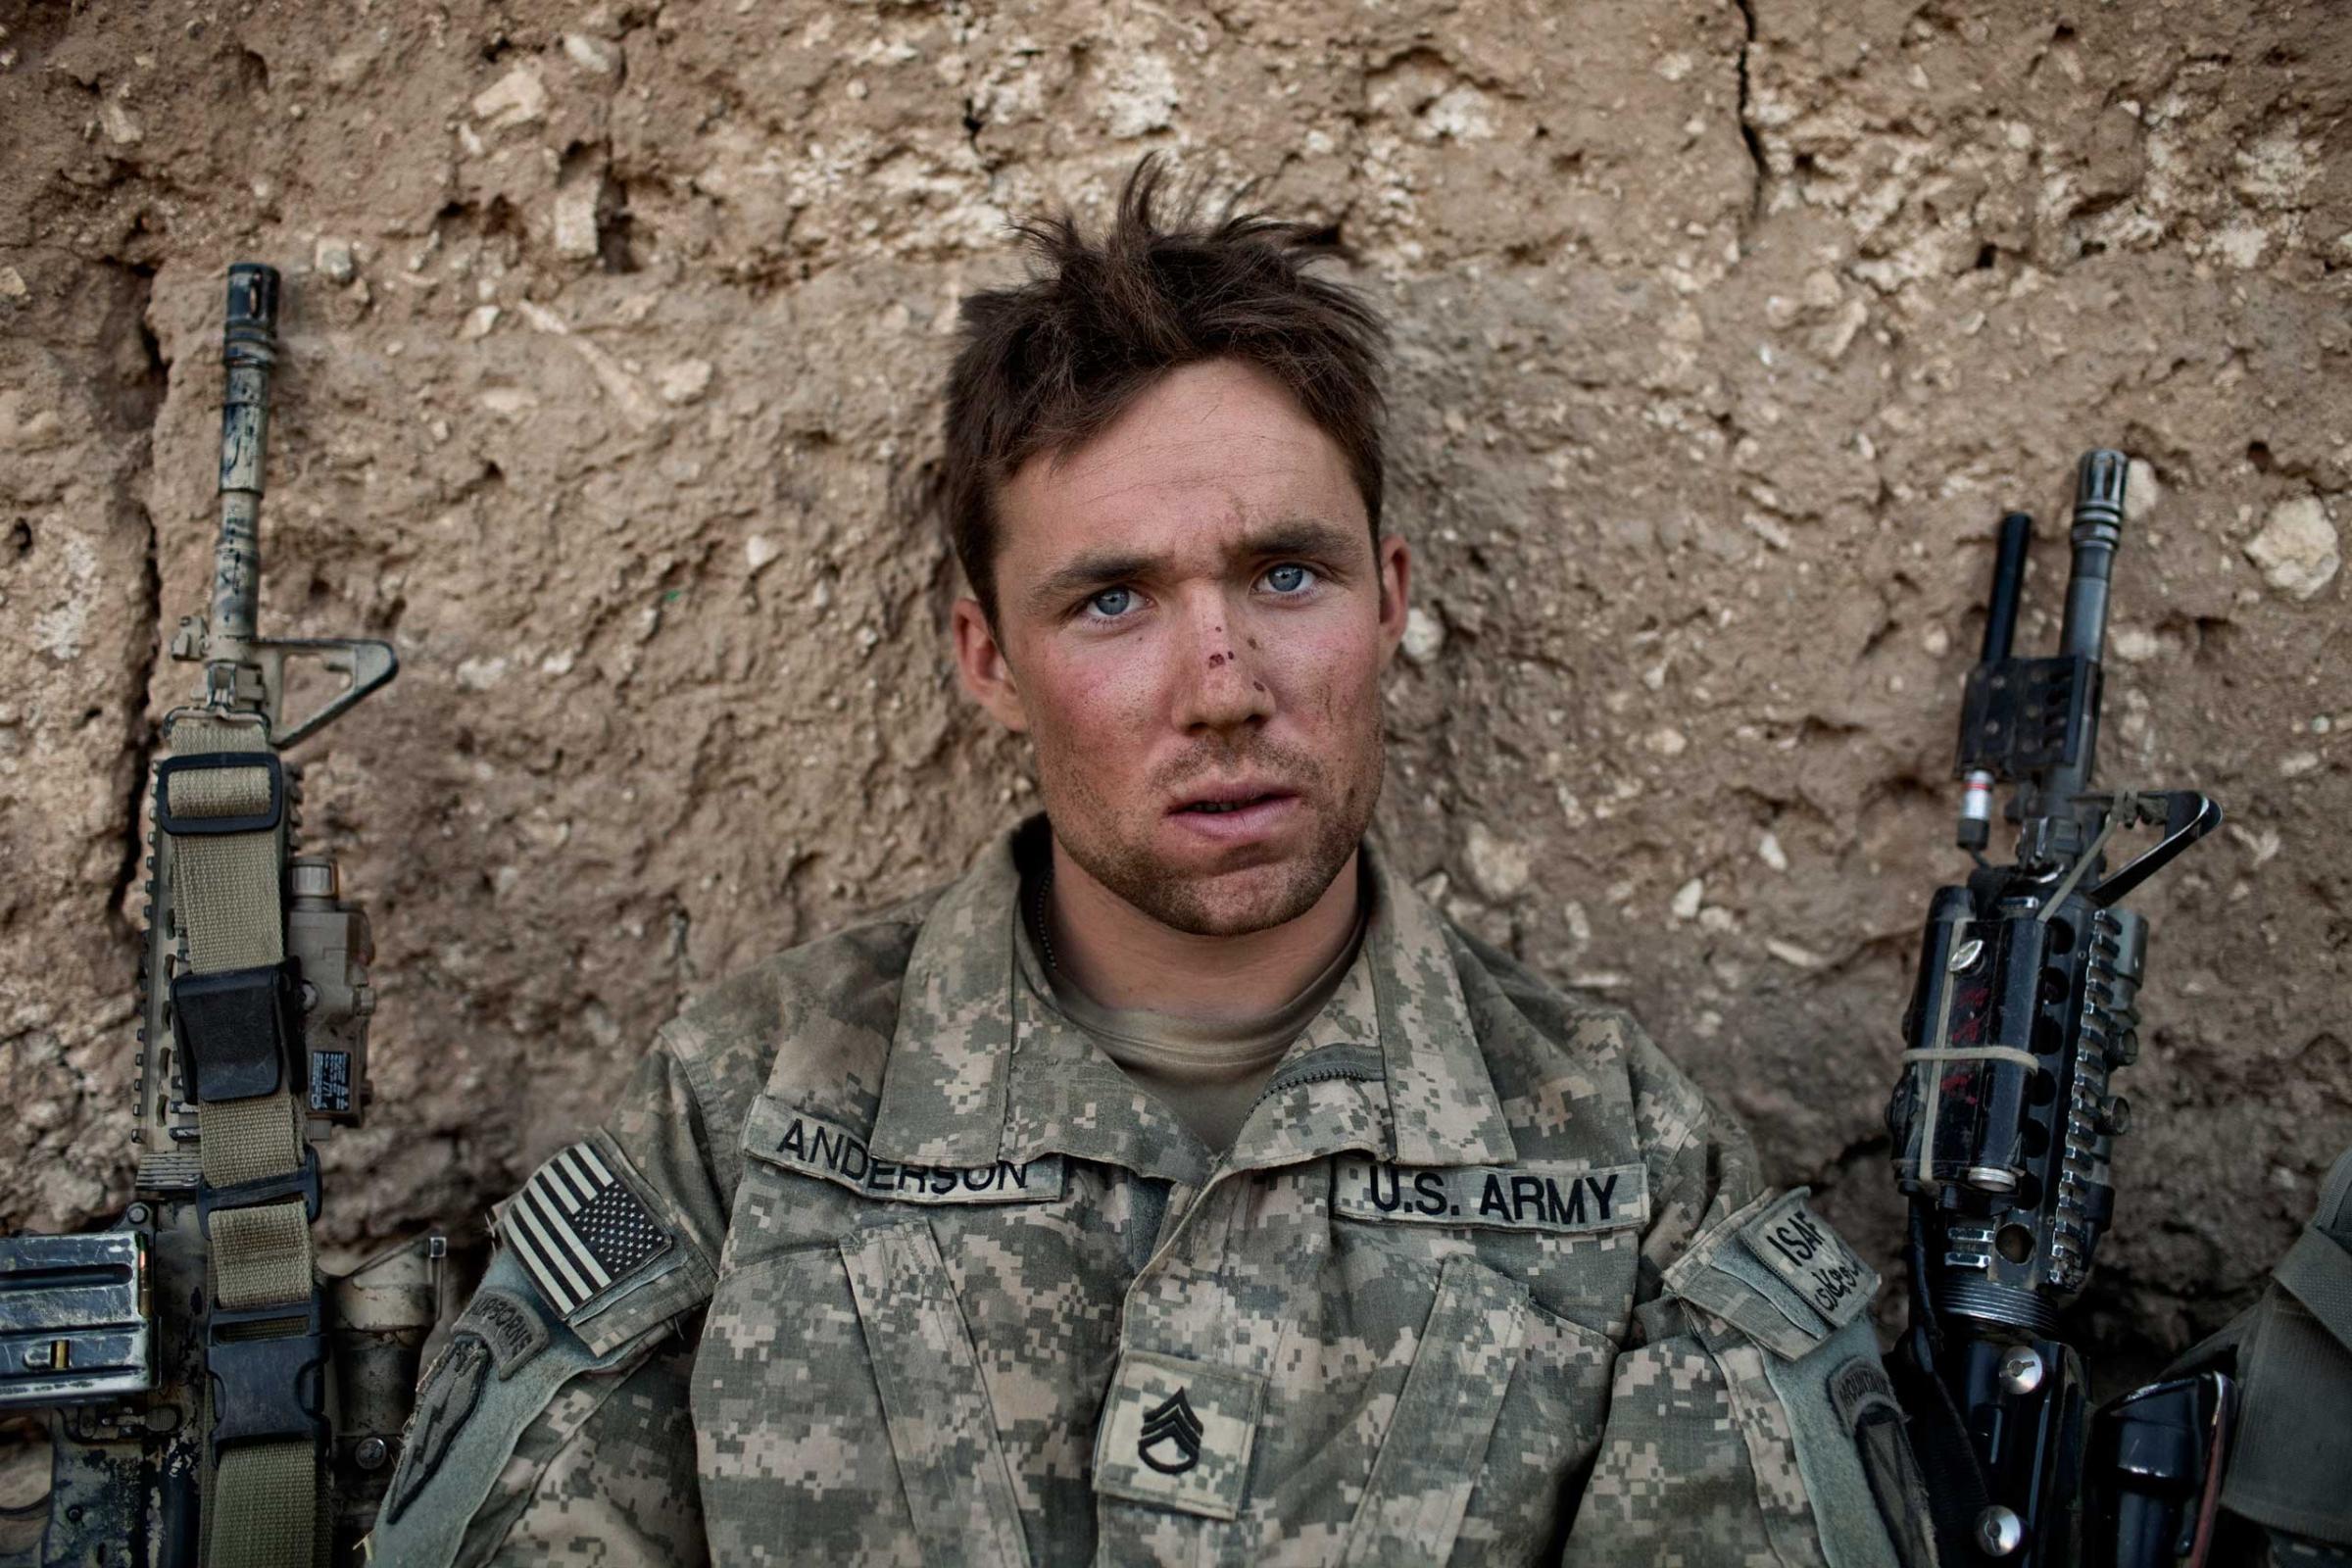 U.S. Army Sergeant Anderson from 1st Platoon, Apache Company, 2nd Battalion, 87th Infantry Regiment, 3rd Brigade Combat Team, 10th Mountain Division sits at a temporary patrol base after a patrol in the Tangi Valley, Wardak Province, Afghanistan, on September 11, 2009. ANA and Apache Company conducted a four-day mission to show an increased presence in the area and to search target houses. Photo by Adam Ferguson